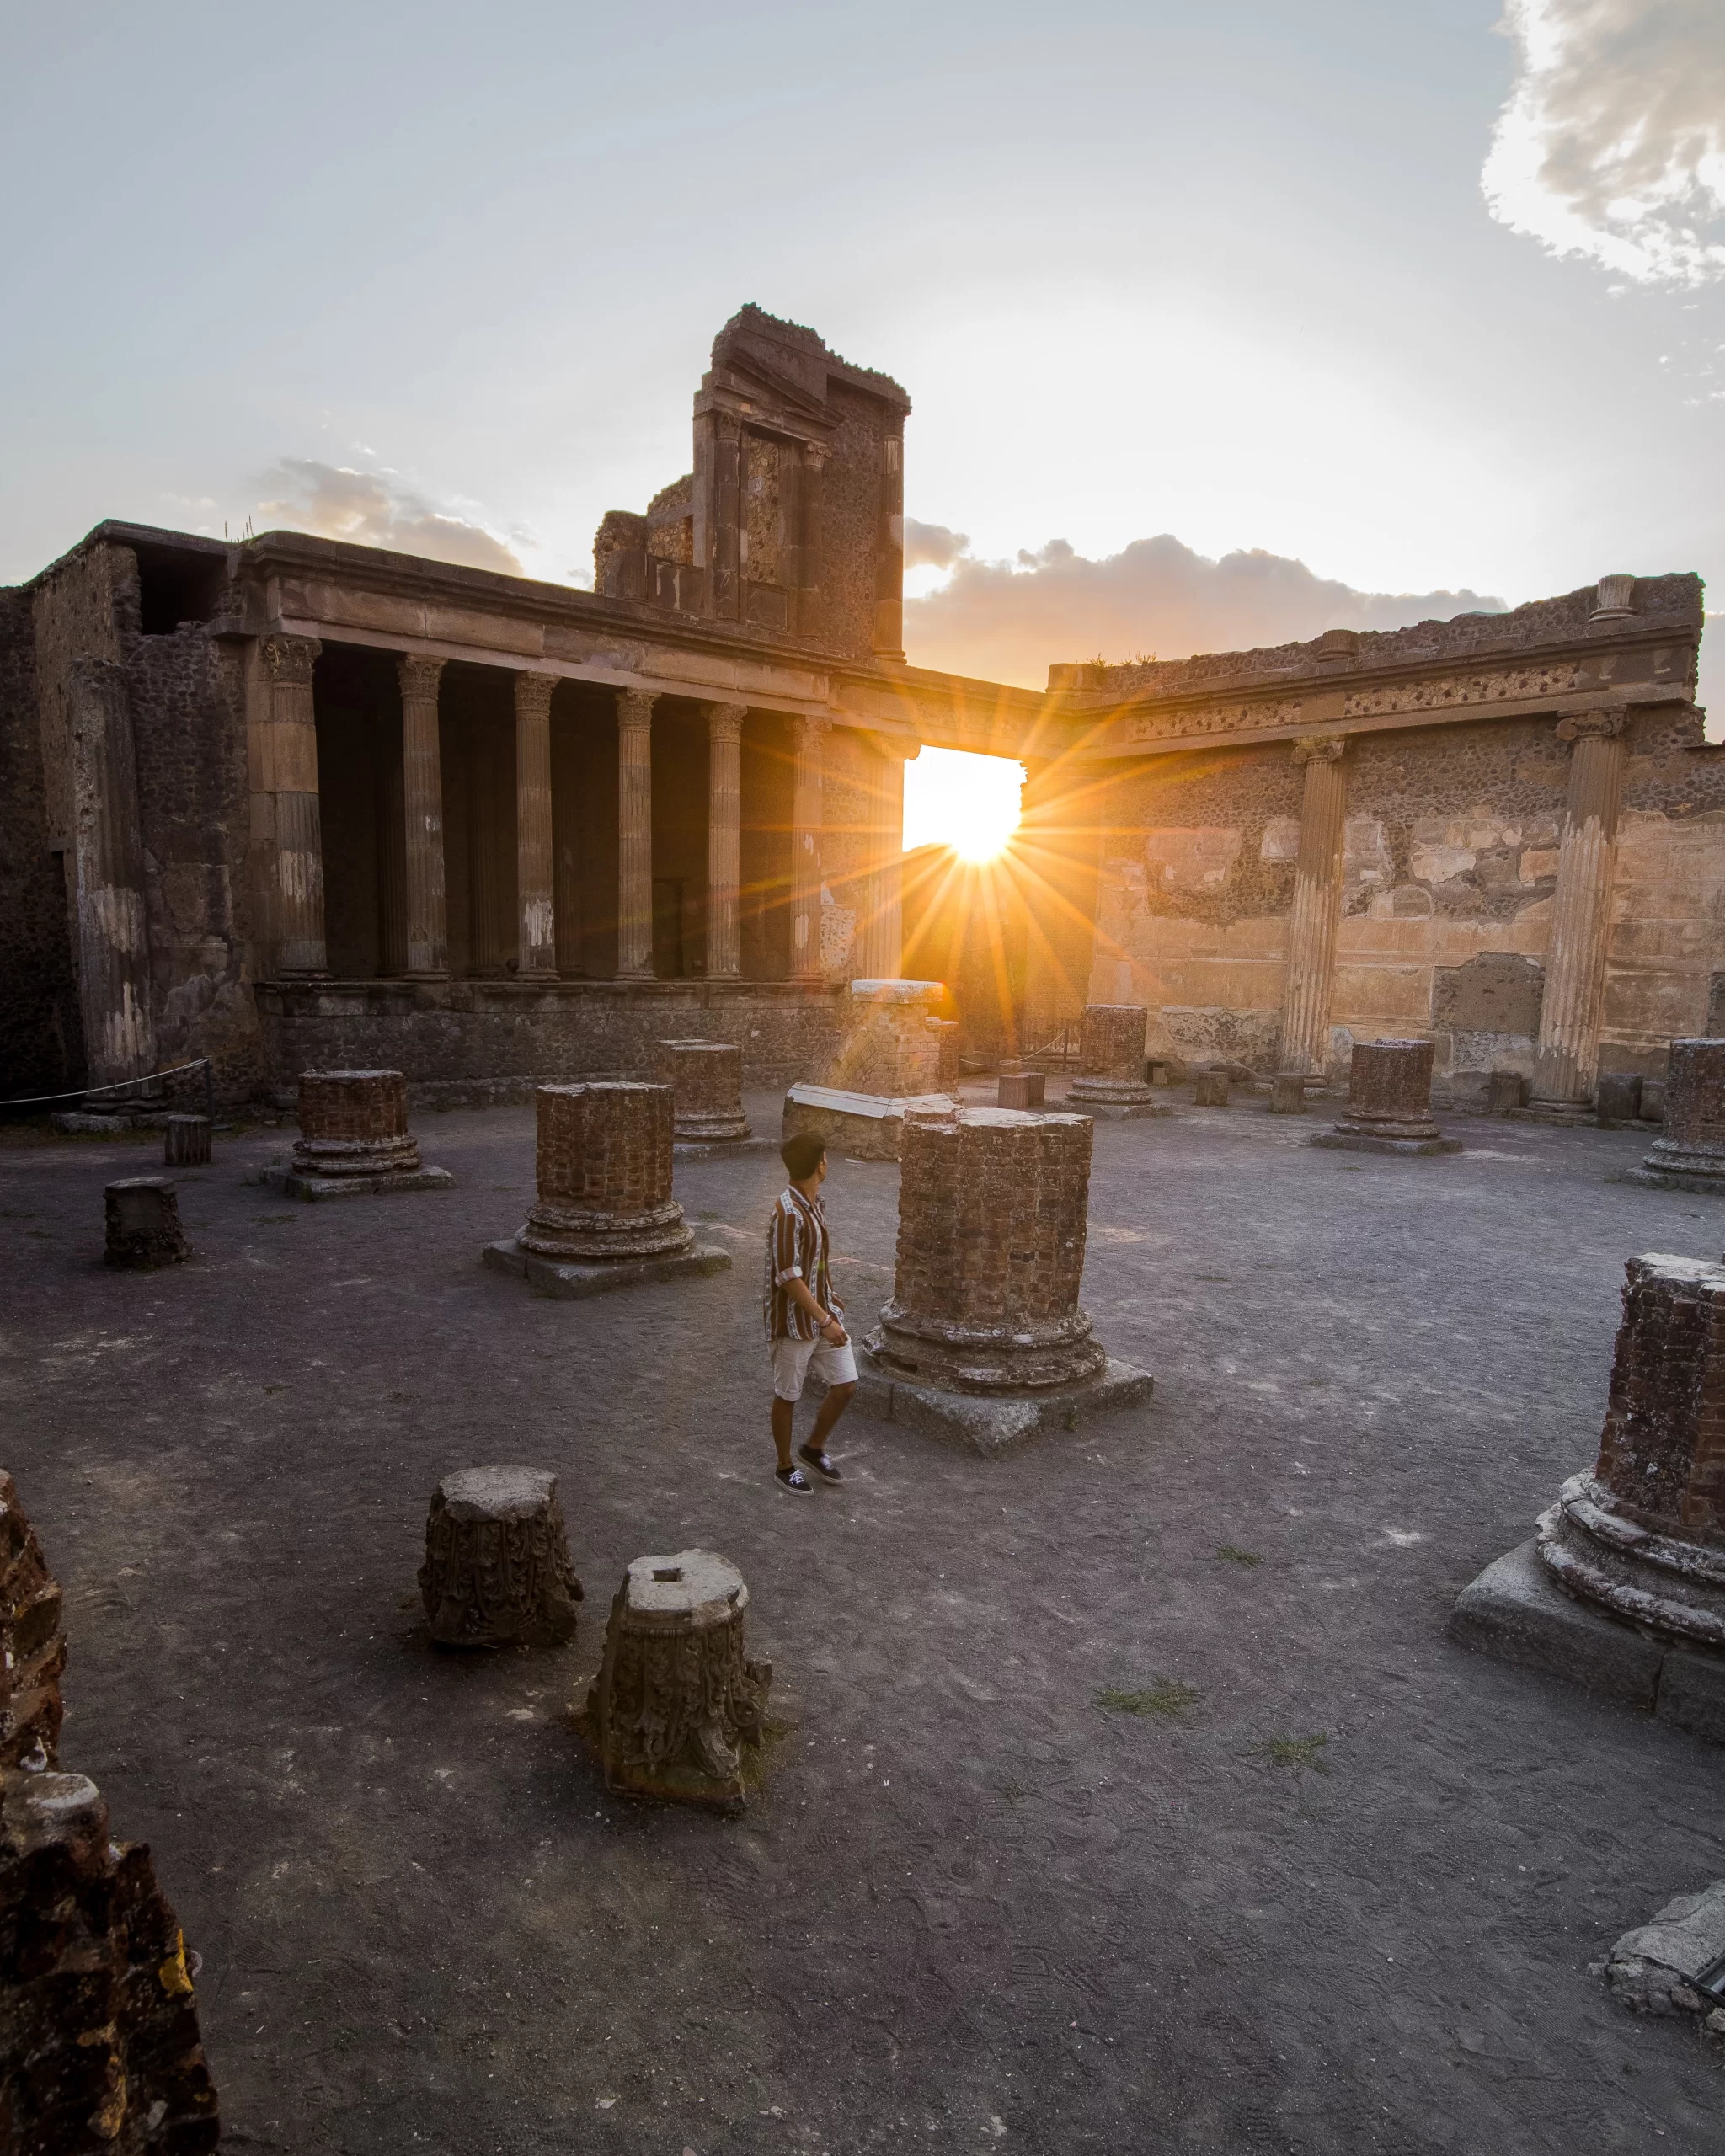 Pompeii, Italy Published on August 29, 2019 Canon, EOS-1D X Mark II Free to use under the Unsplash License Insane sunset in Pompeii